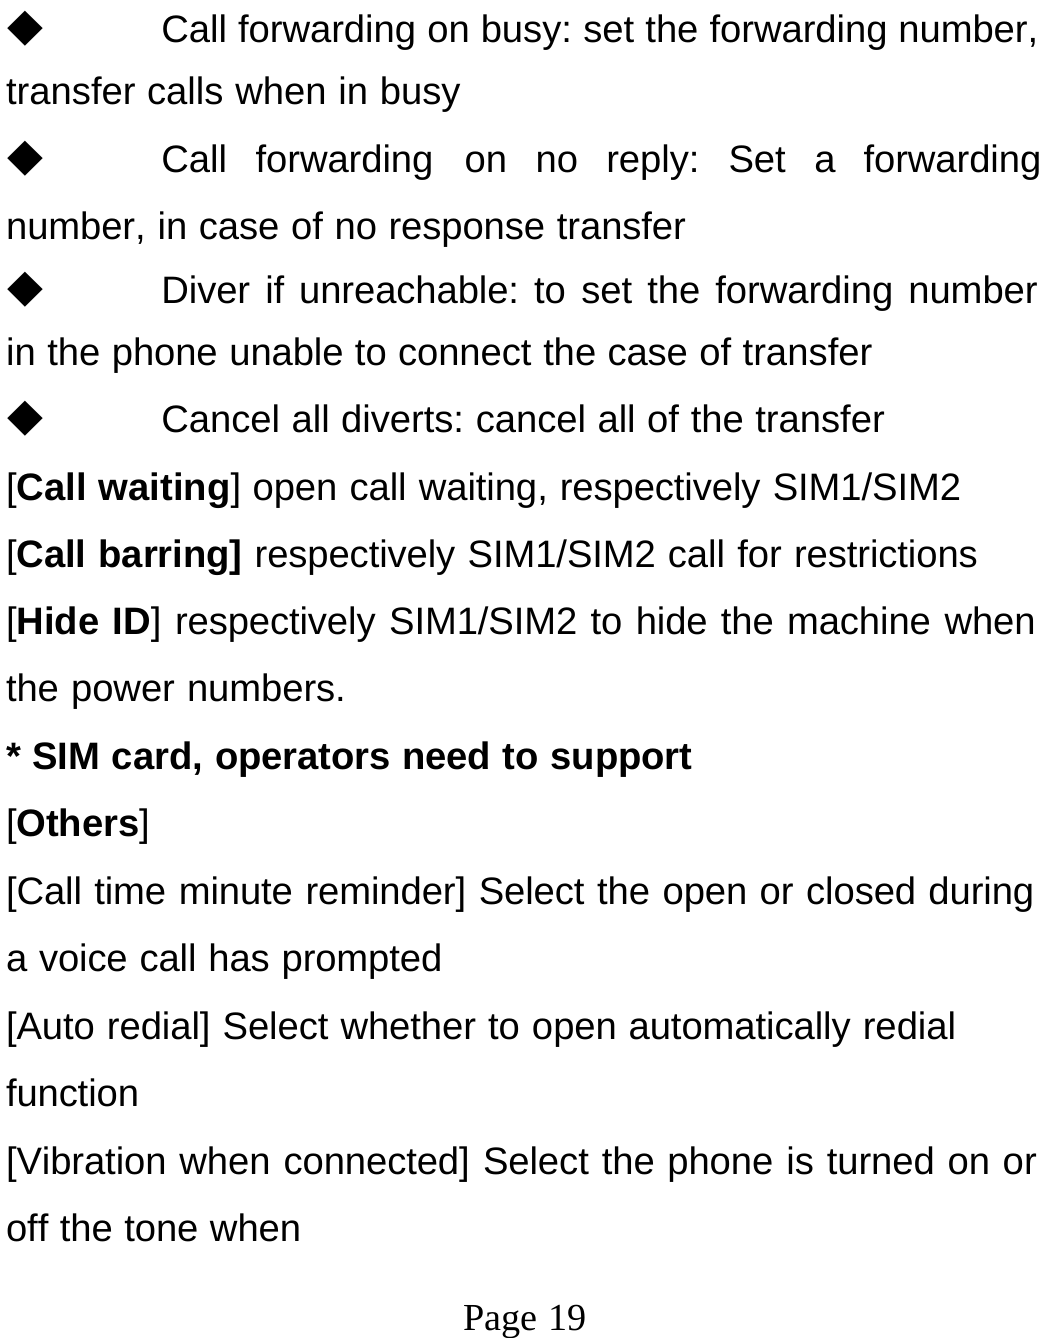 Page 19◆ Call forwarding on busy: set the forwarding number, transfer calls when in busy ◆ Call forwarding on no reply: Set a forwarding number, in case of no response transfer ◆ Diver if unreachable: to set the forwarding number in the phone unable to connect the case of transfer ◆ Cancel all diverts: cancel all of the transfer [Call waiting] open call waiting, respectively SIM1/SIM2 [Call barring] respectively SIM1/SIM2 call for restrictions [Hide ID] respectively SIM1/SIM2 to hide the machine when the power numbers. * SIM card, operators need to support [Others] [Call time minute reminder] Select the open or closed during a voice call has prompted [Auto redial] Select whether to open automatically redial function [Vibration when connected] Select the phone is turned on or off the tone when 